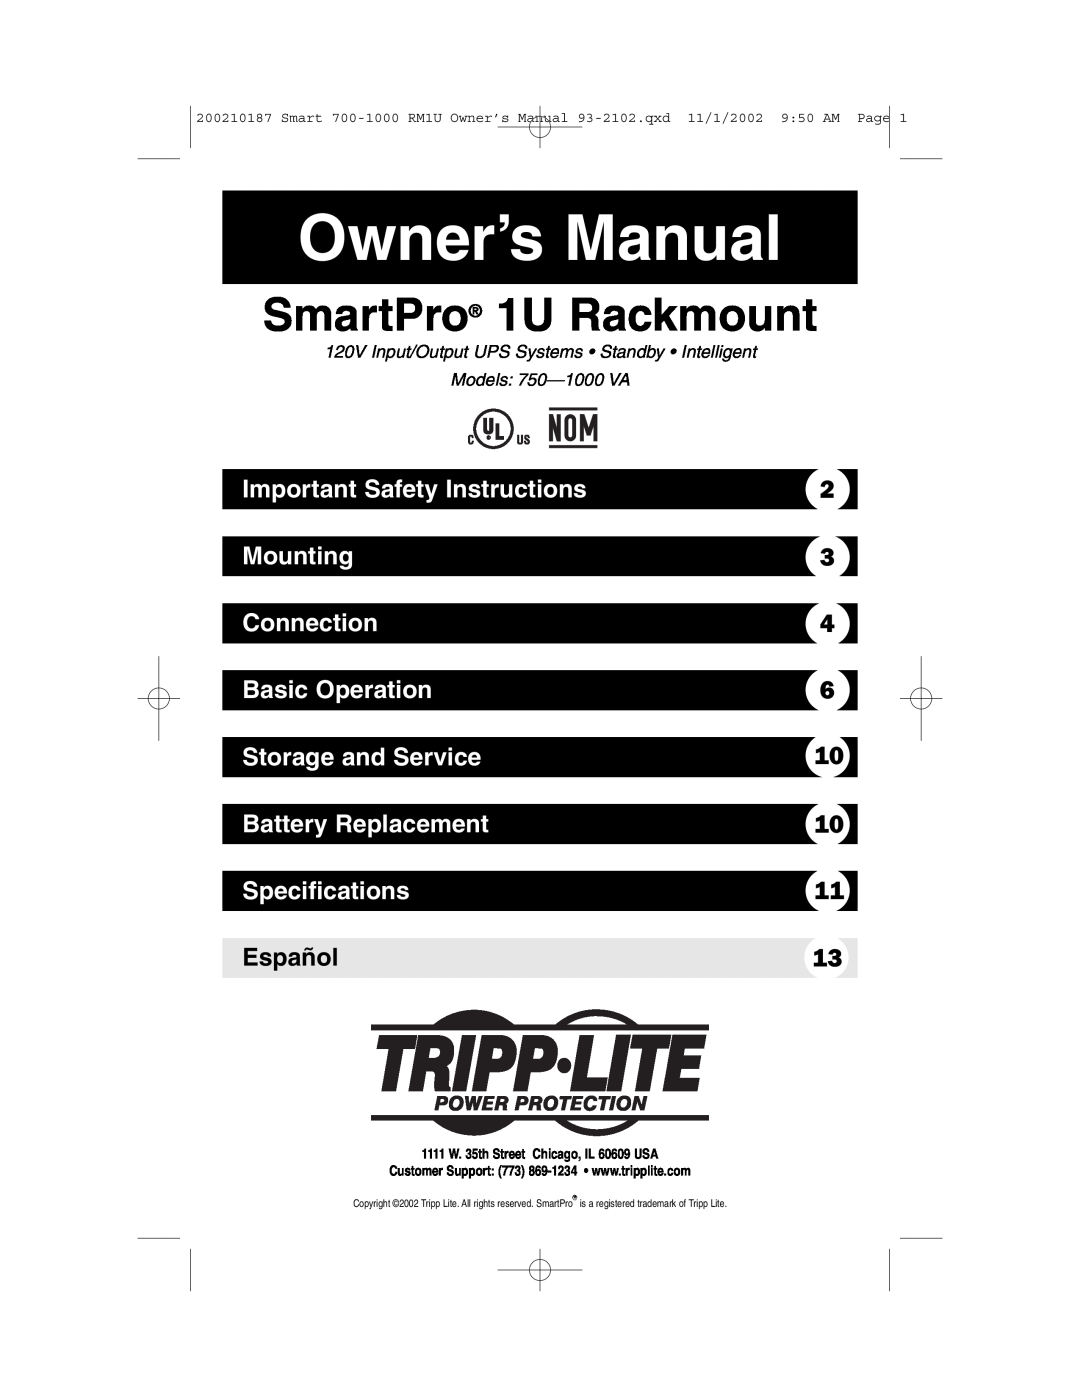 Tripp Lite 1000 VA owner manual Important Safety Instructions, Mounting, Connection, Basic Operation, Storage and Service 